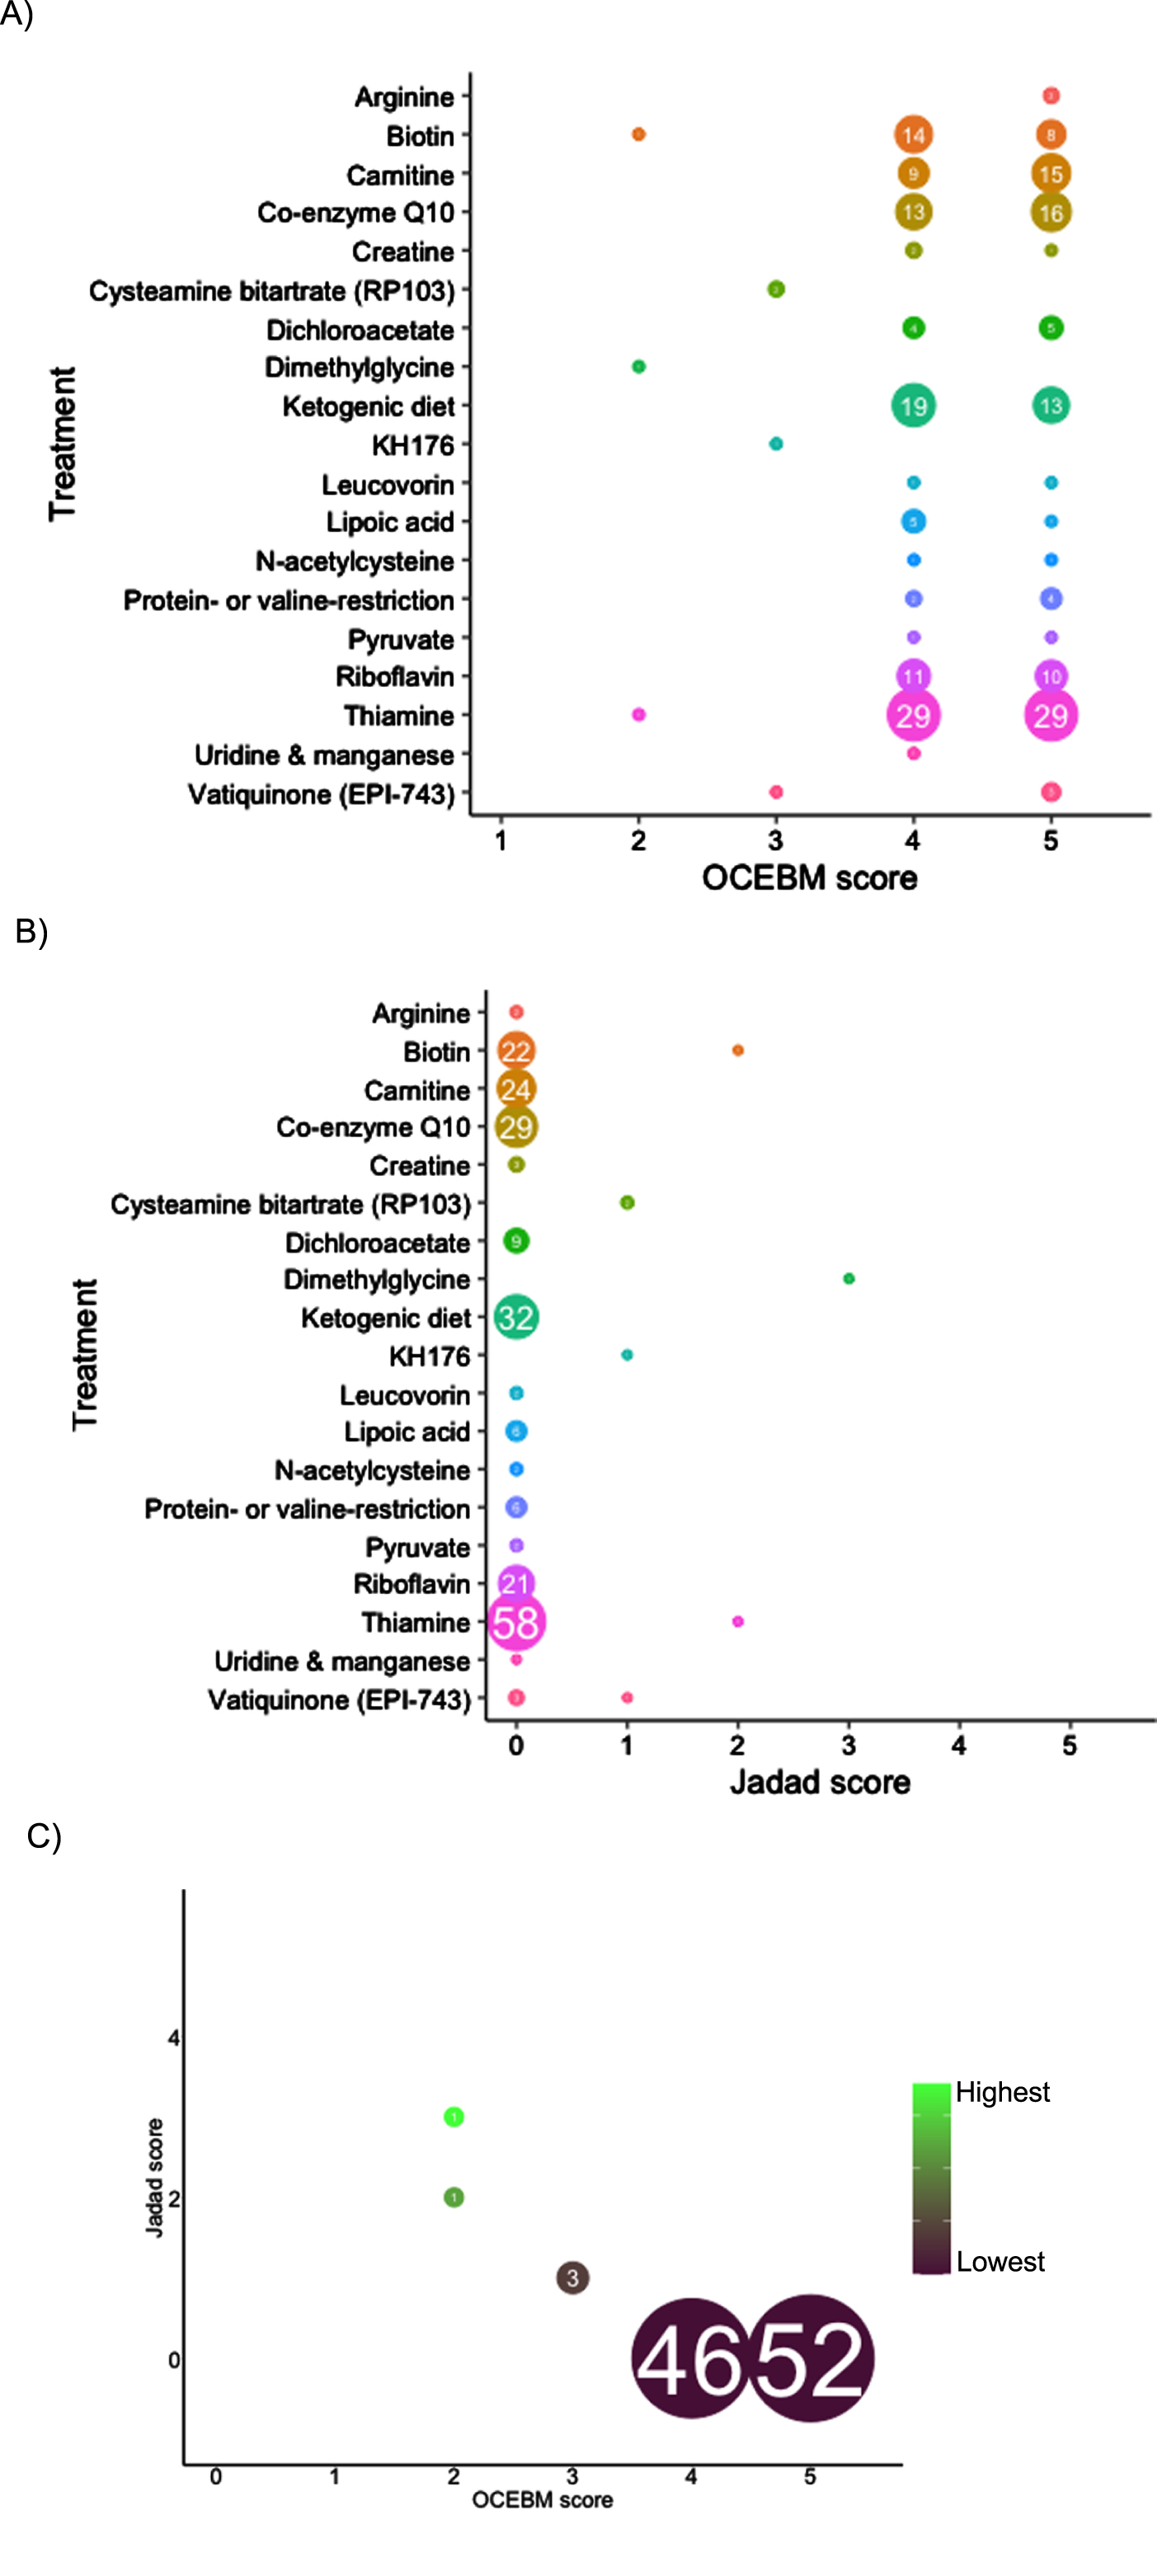 Level of evidence of treatment in Leigh syndrome according to treatment, number of studies and OCEBM score (4A), Jadad score (4B), combined Jadad and OCEBM score.